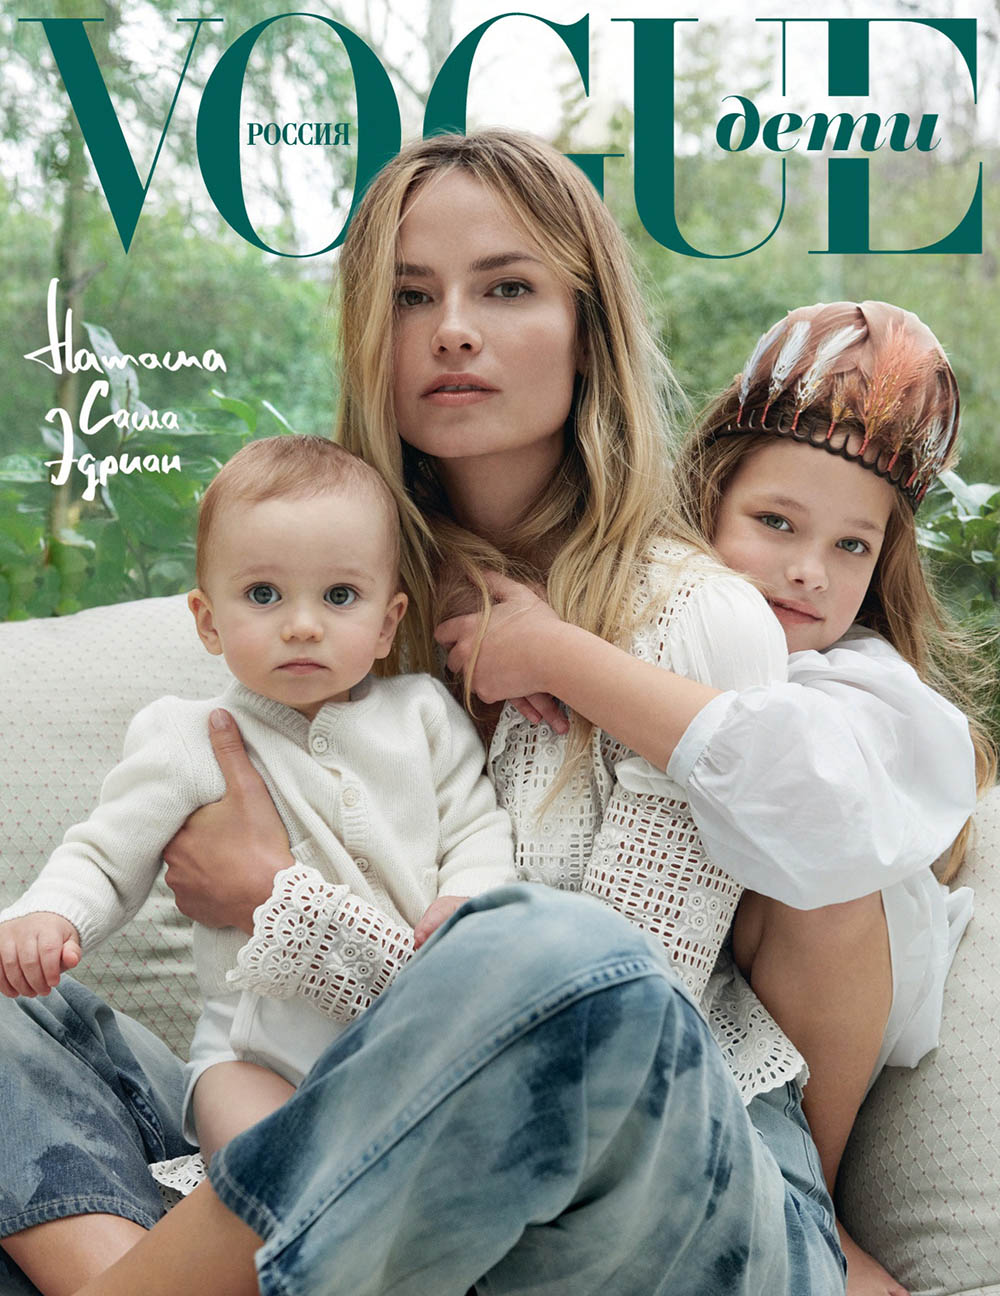 Natasha Poly covers Vogue Russia April 2020 by Claudia Knoepfel